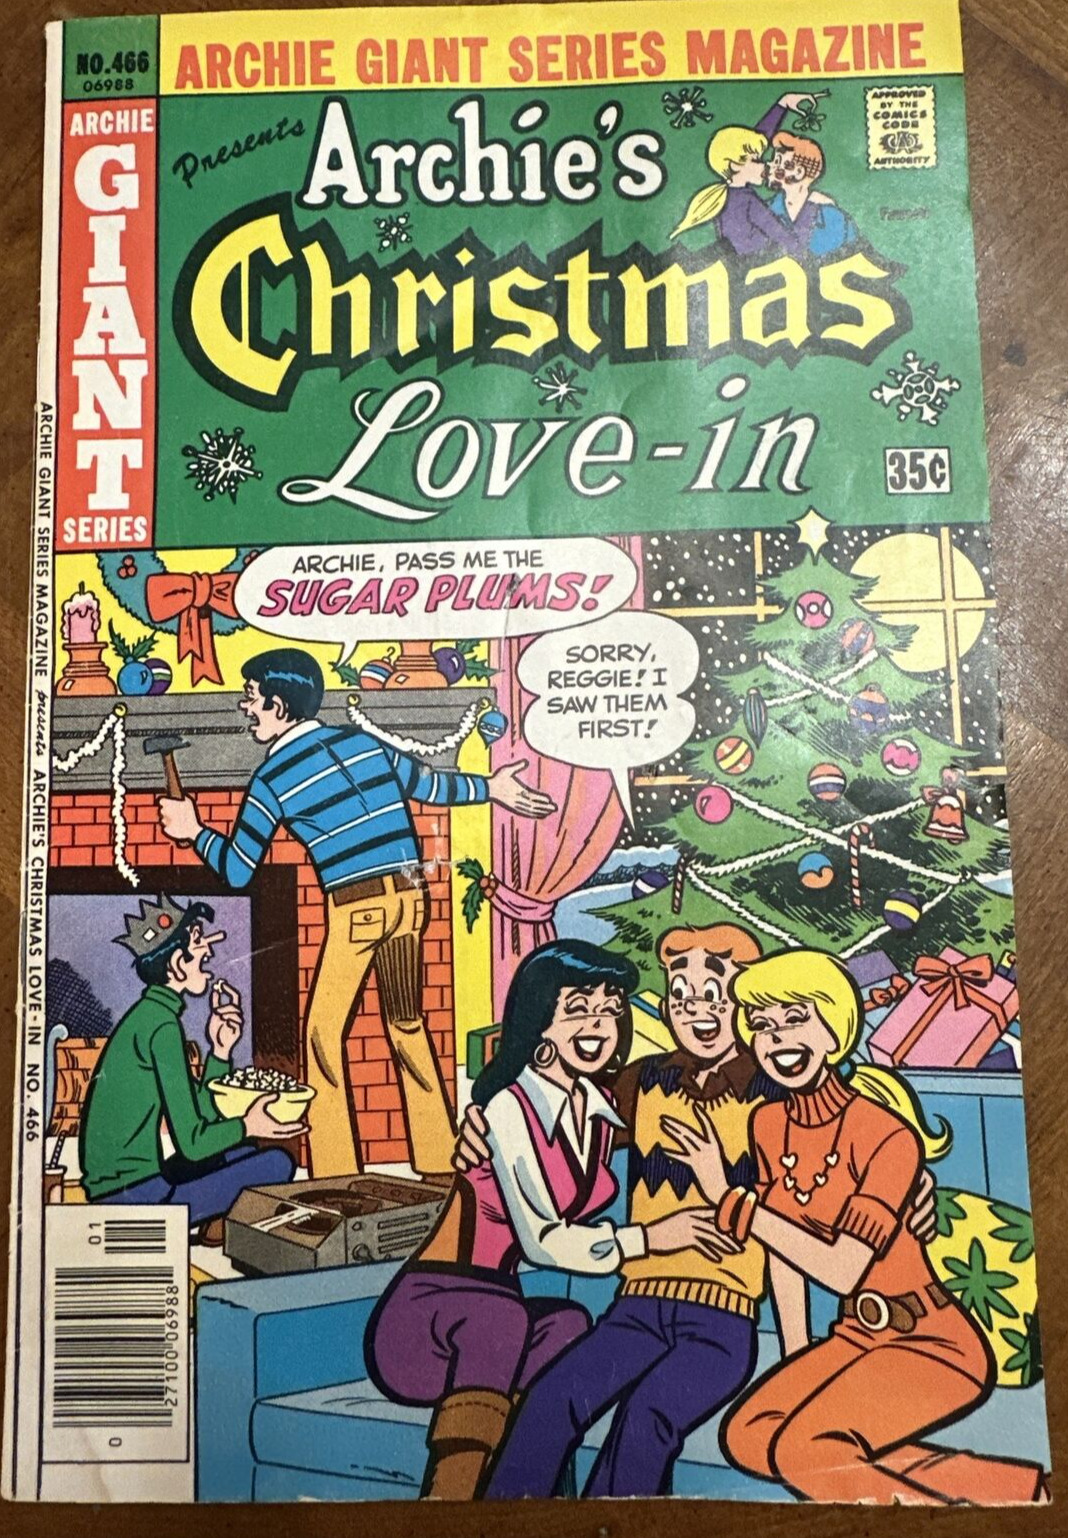 Archie Giant Series Magazine Presents Archie’s Christmas Love-In #466 1978